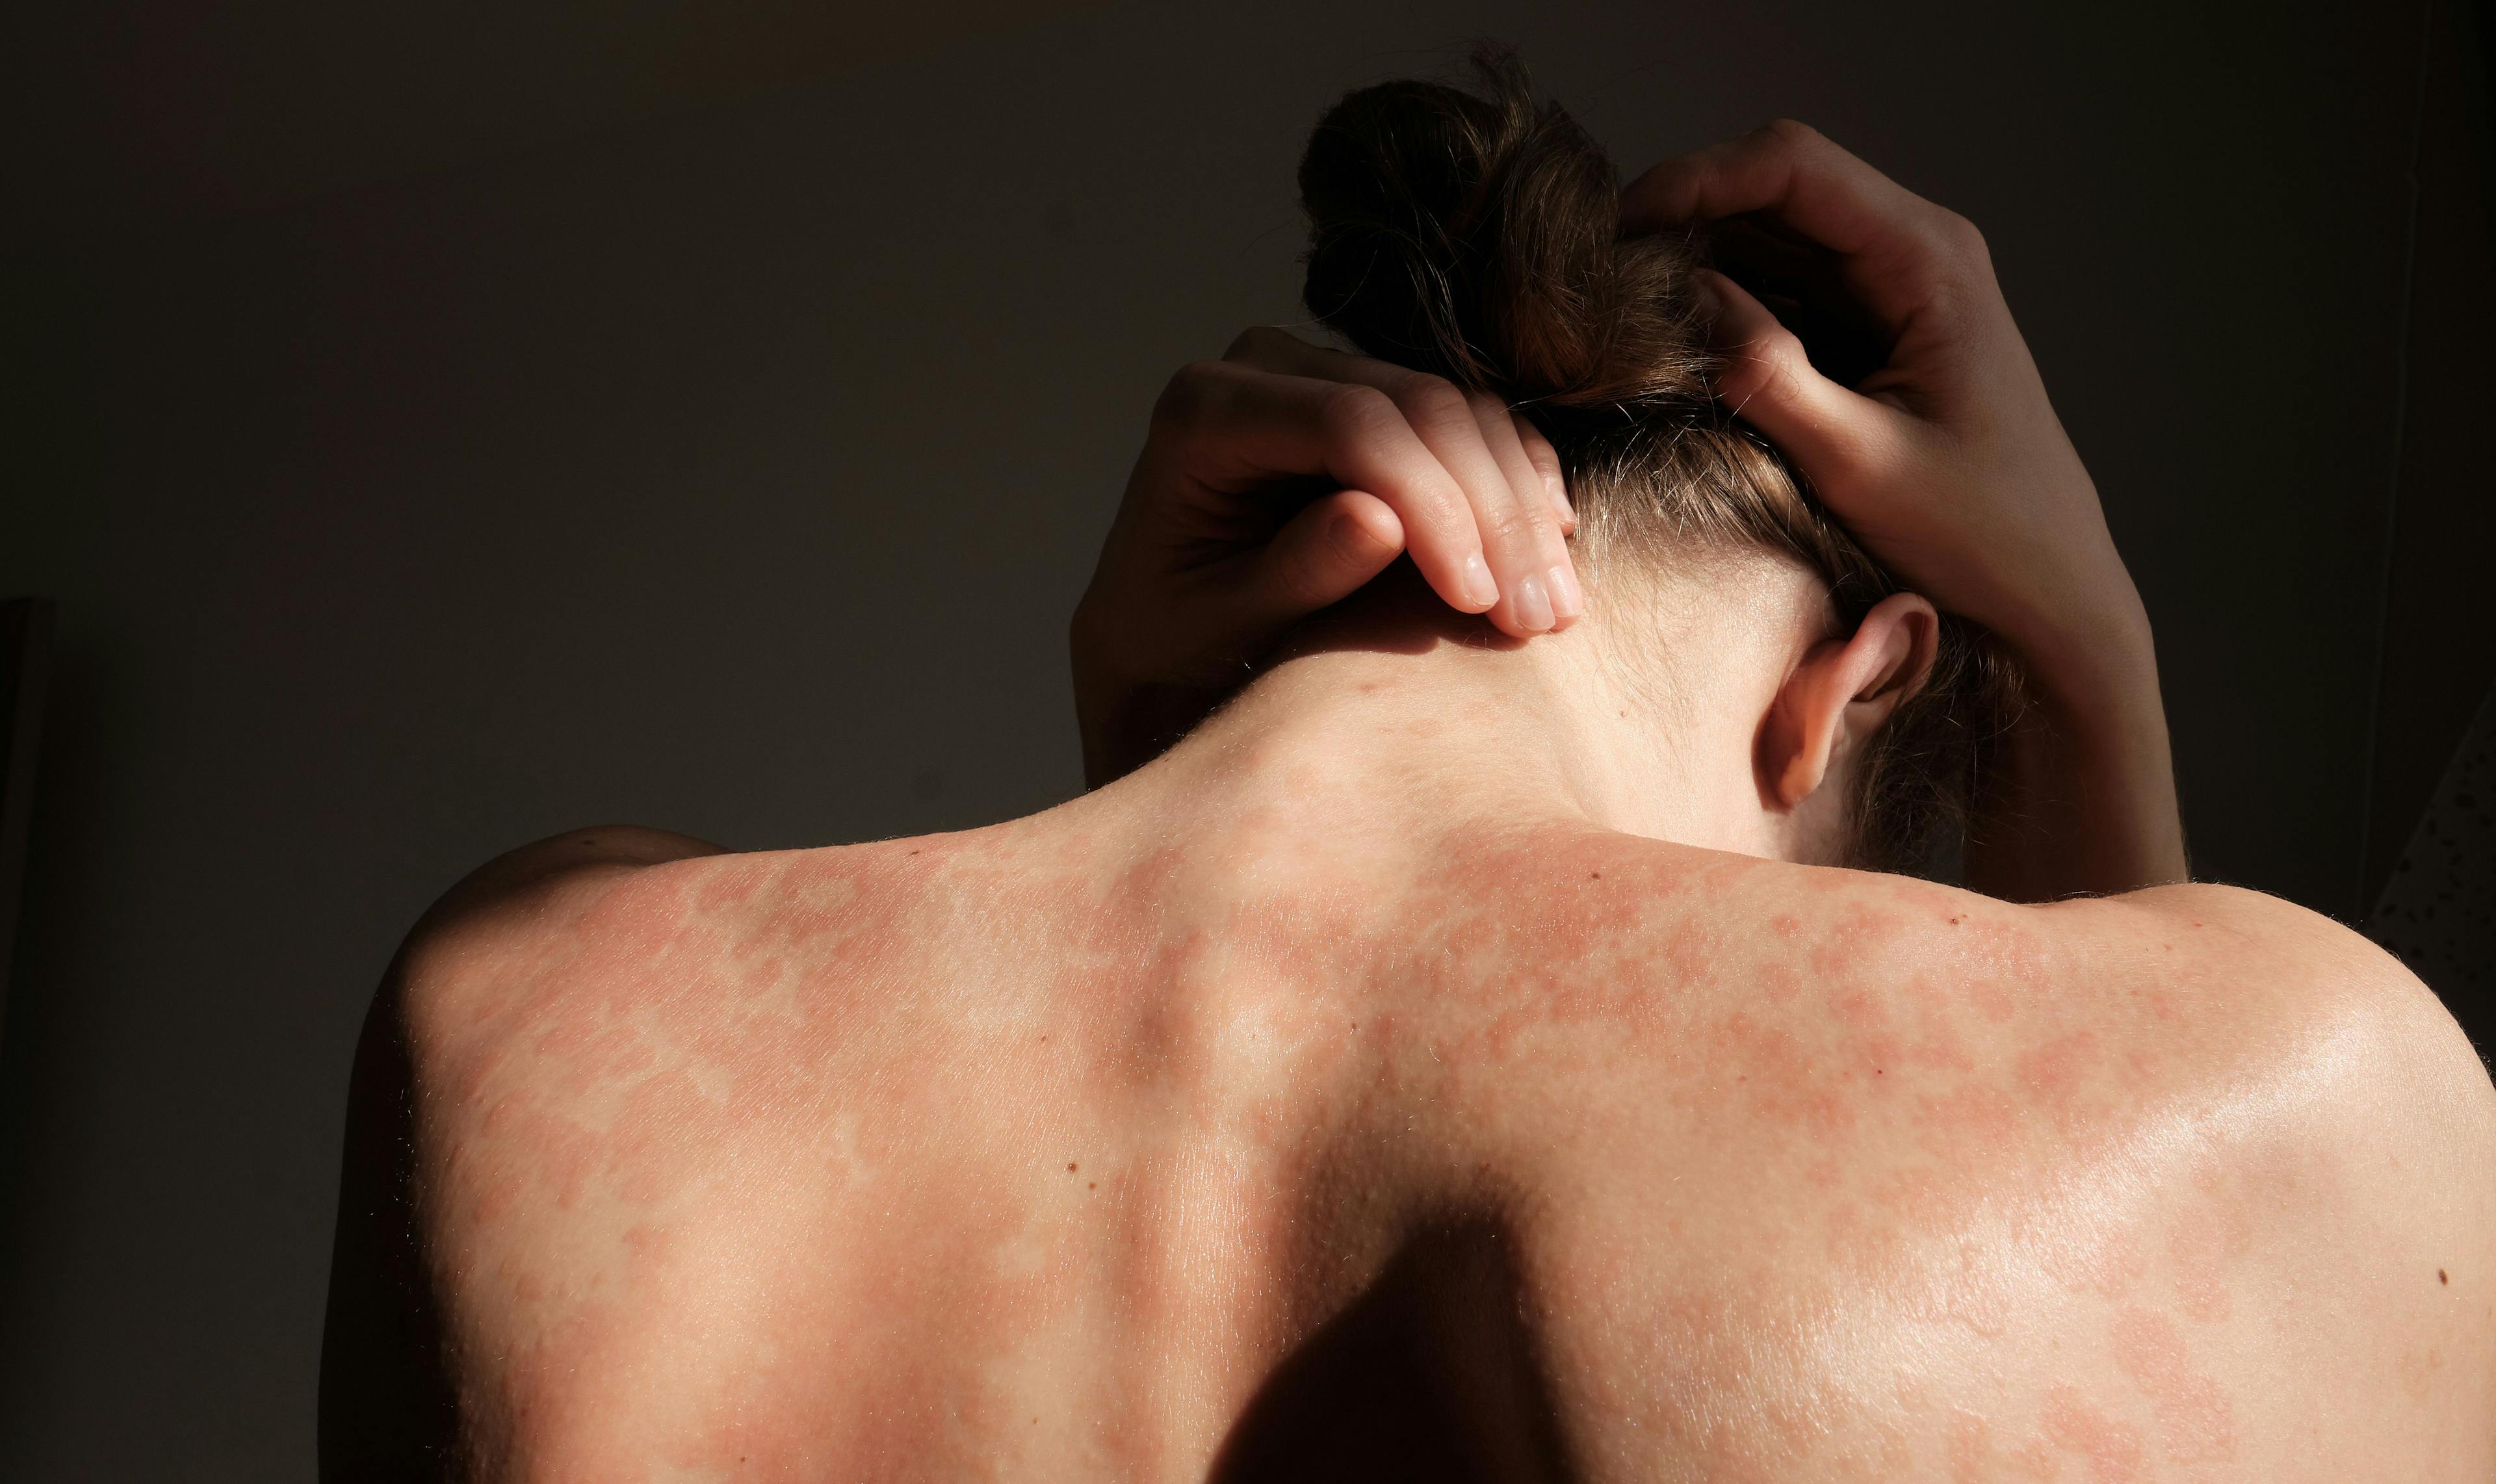 Close-up woman touches herself. Neck, back, spine. Psoriasis skin, eczema, rash and other skin diseases. A woman hides her face, she is ashamed of her autoimmune genetic disease - Image credit: stockmaster | stock.adobe.com